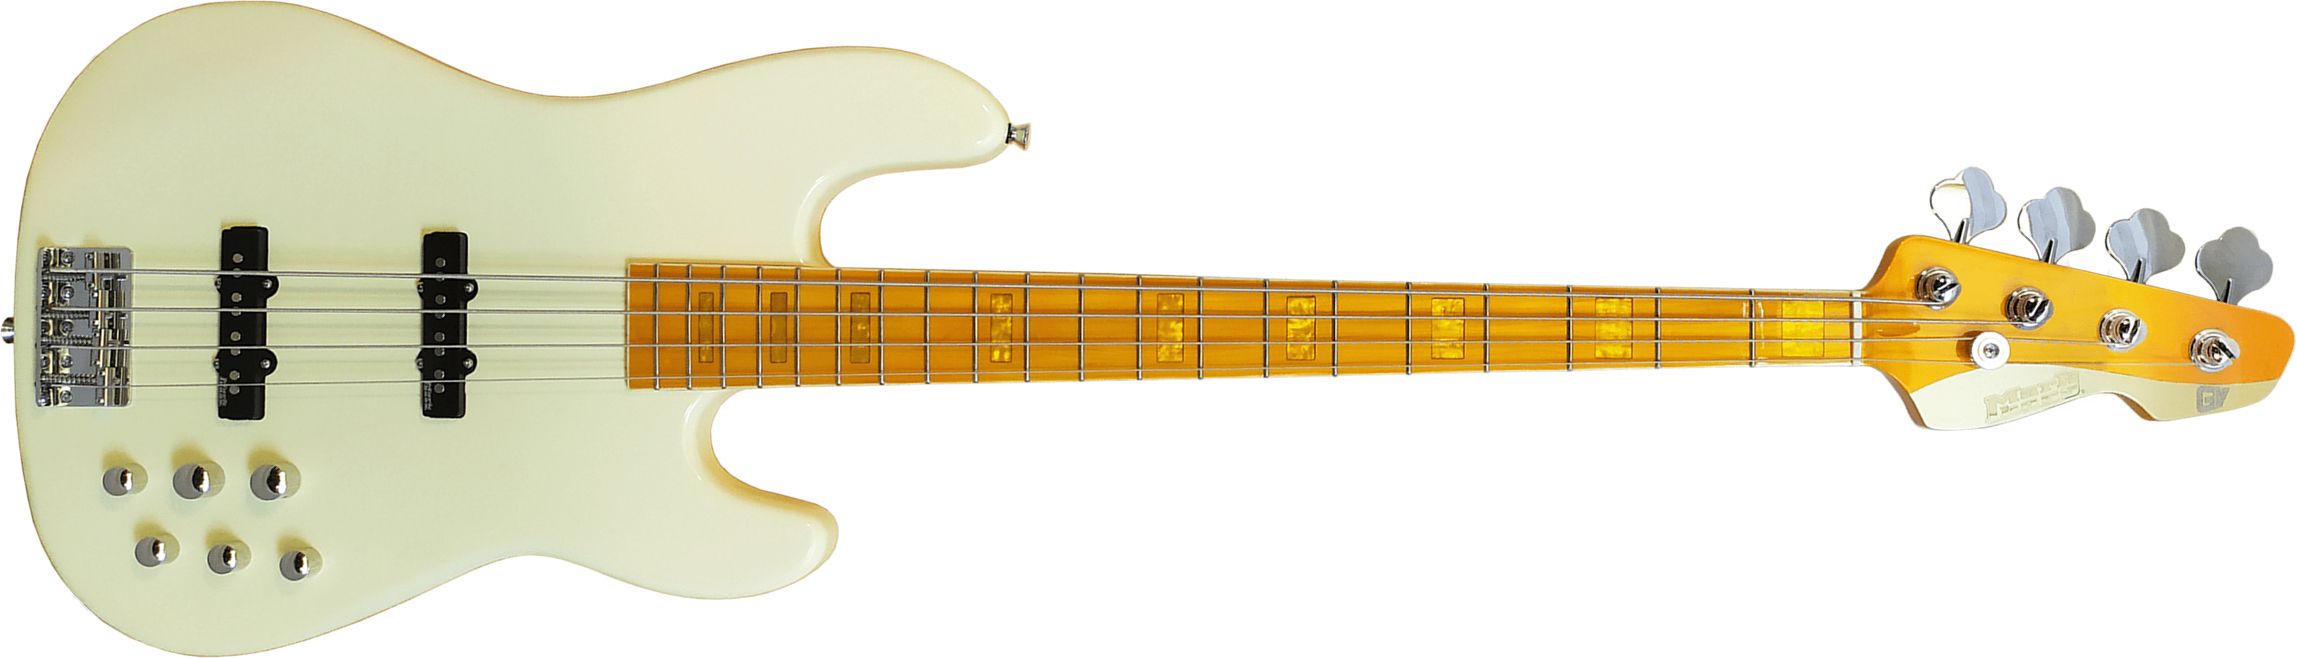 Markbass Mb Gv 4 Gloxy Val Cr Mp Active Mn - Cream - Solid body electric bass - Main picture